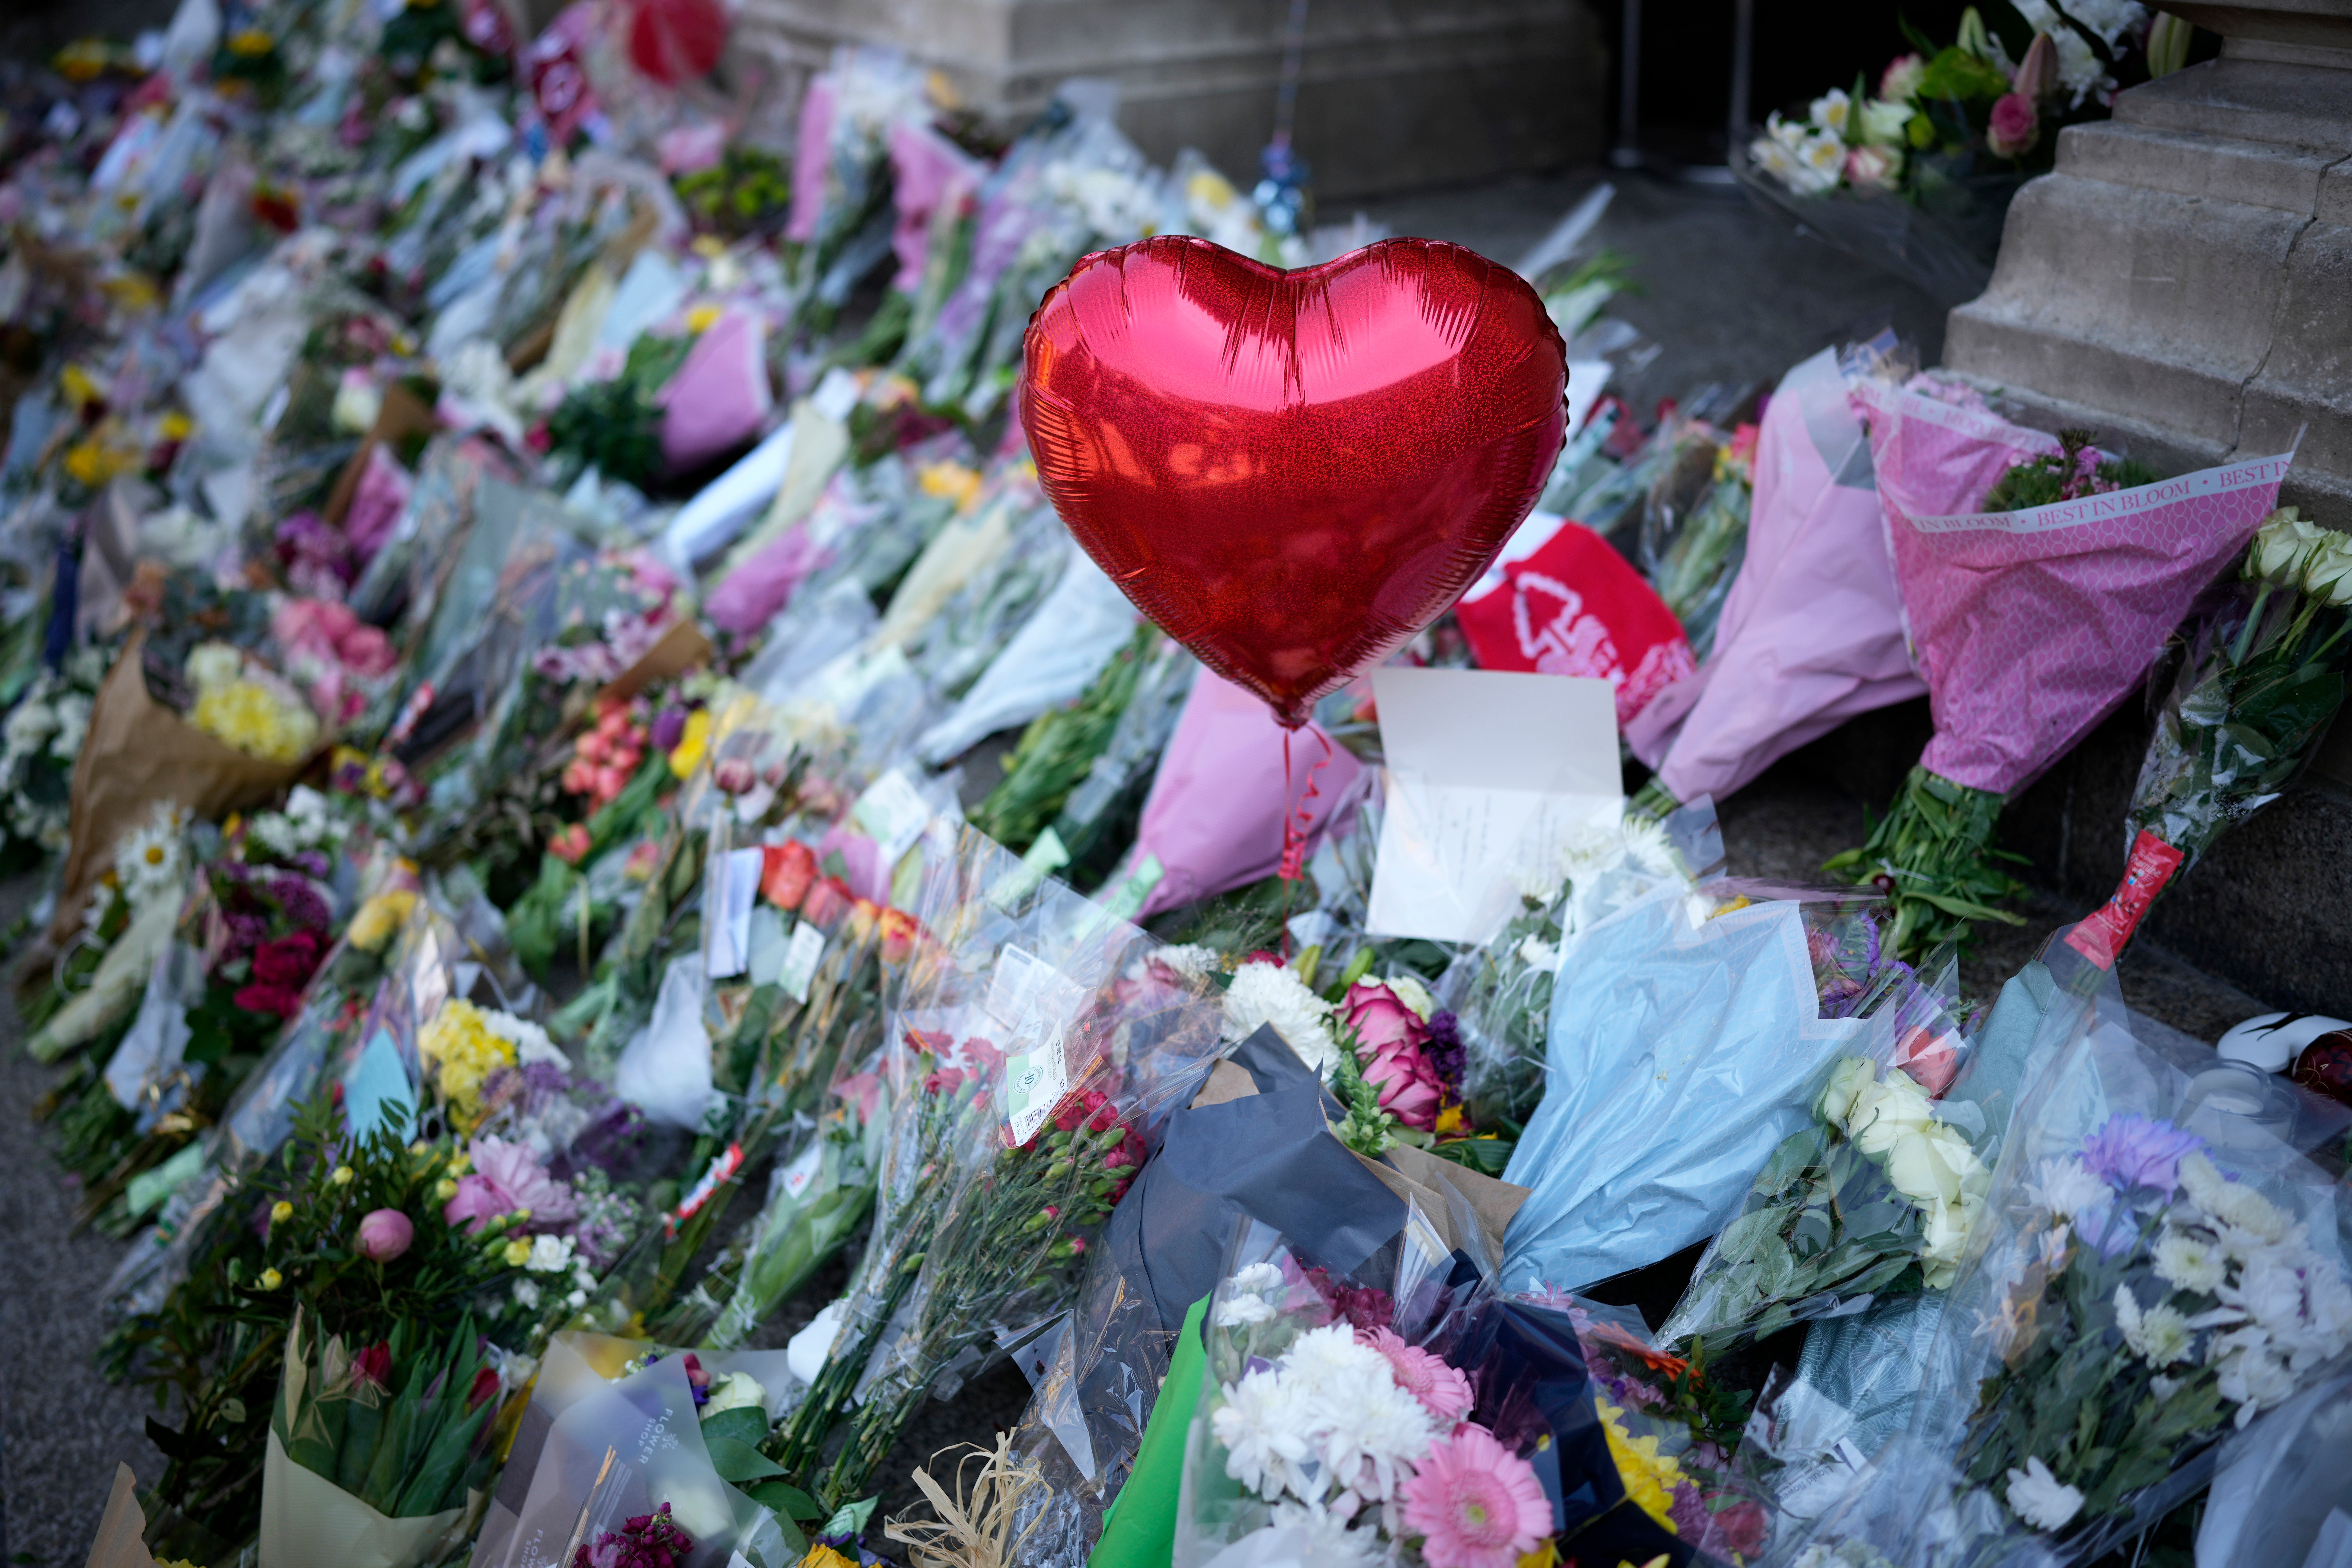 Floral tributes left at Nottingham Council House in the wake of the stabbings